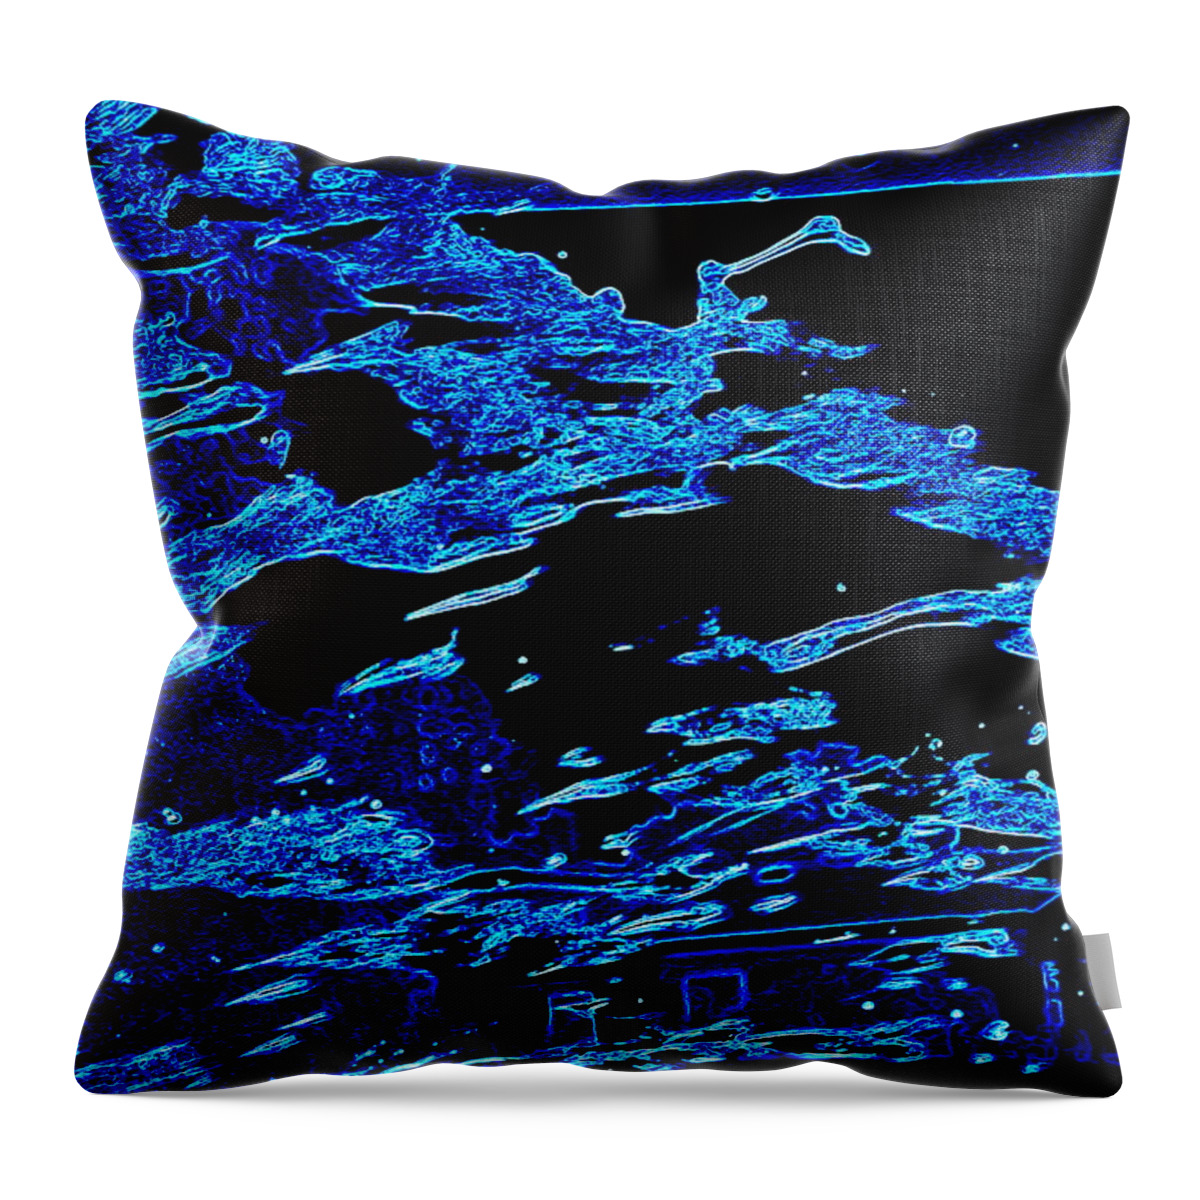 Cosmic Throw Pillow featuring the photograph Cosmic Series 001 by Larry Ward